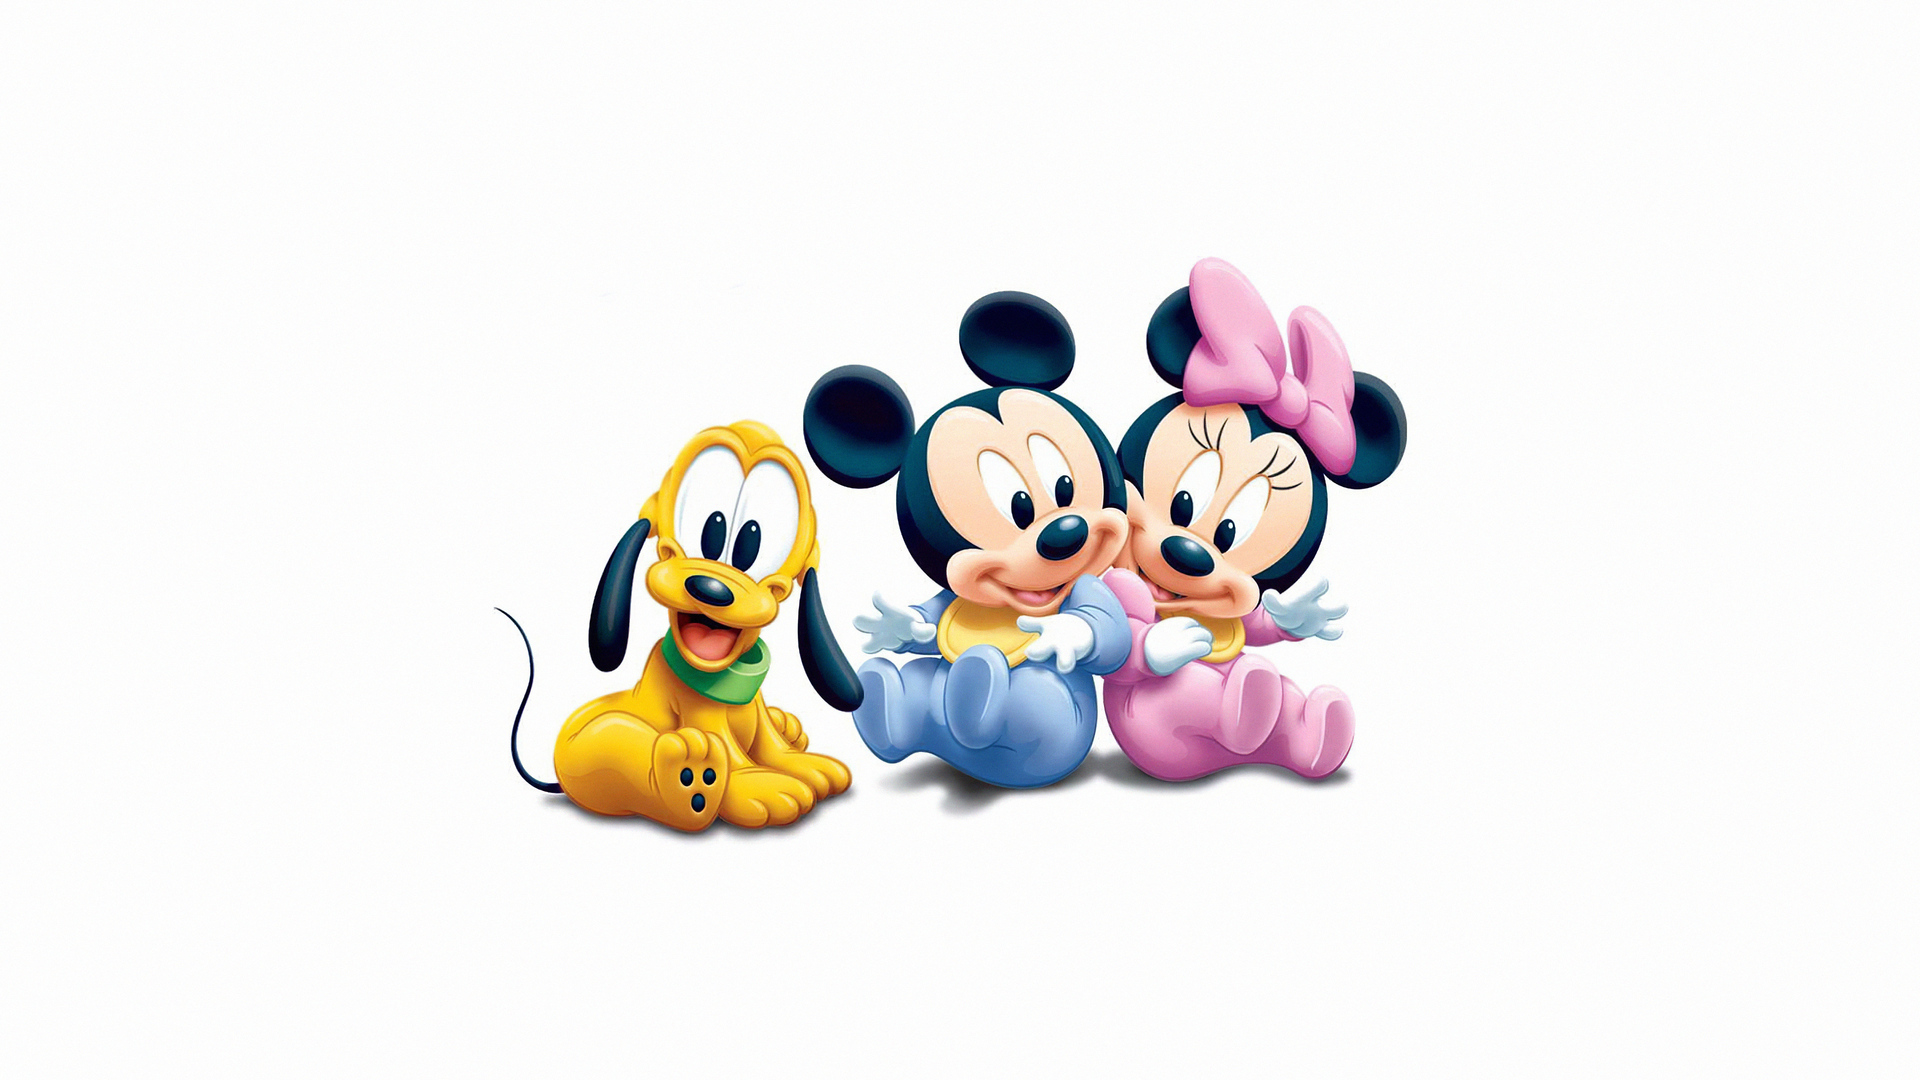 mickey-mouse-and-goofy-0y.jpg